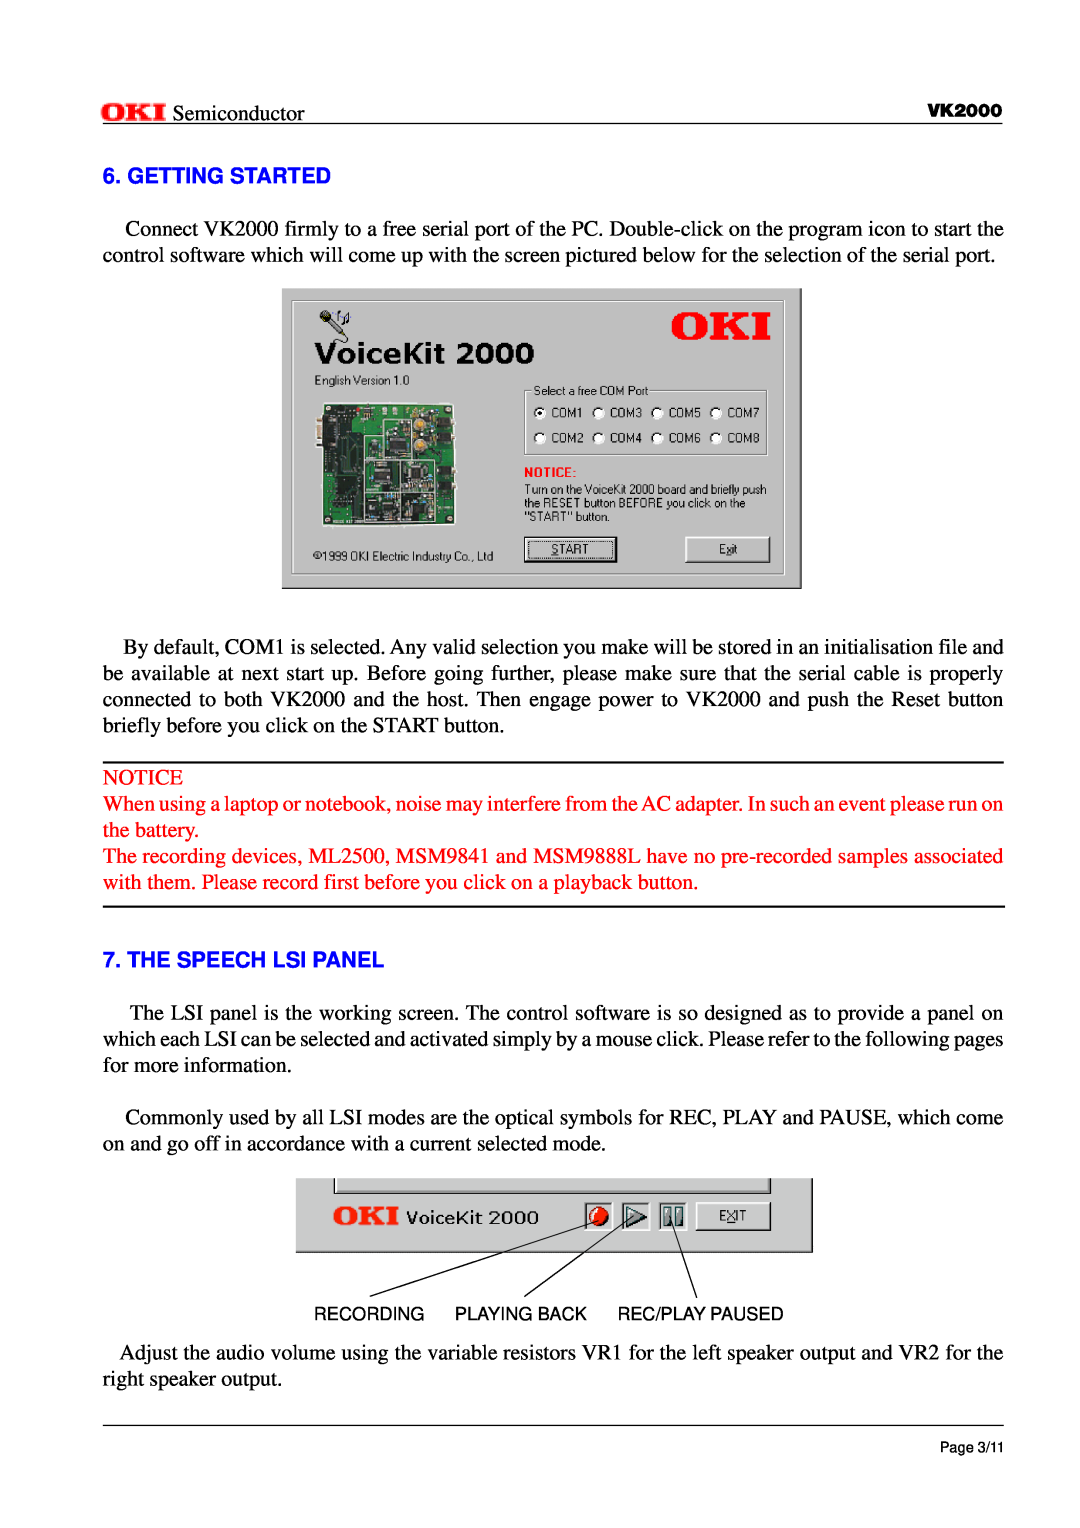 Oki VK2000 instruction manual Getting Started, The Speech Lsi Panel, Semiconductor, Recording Playing Back Rec/Play Paused 